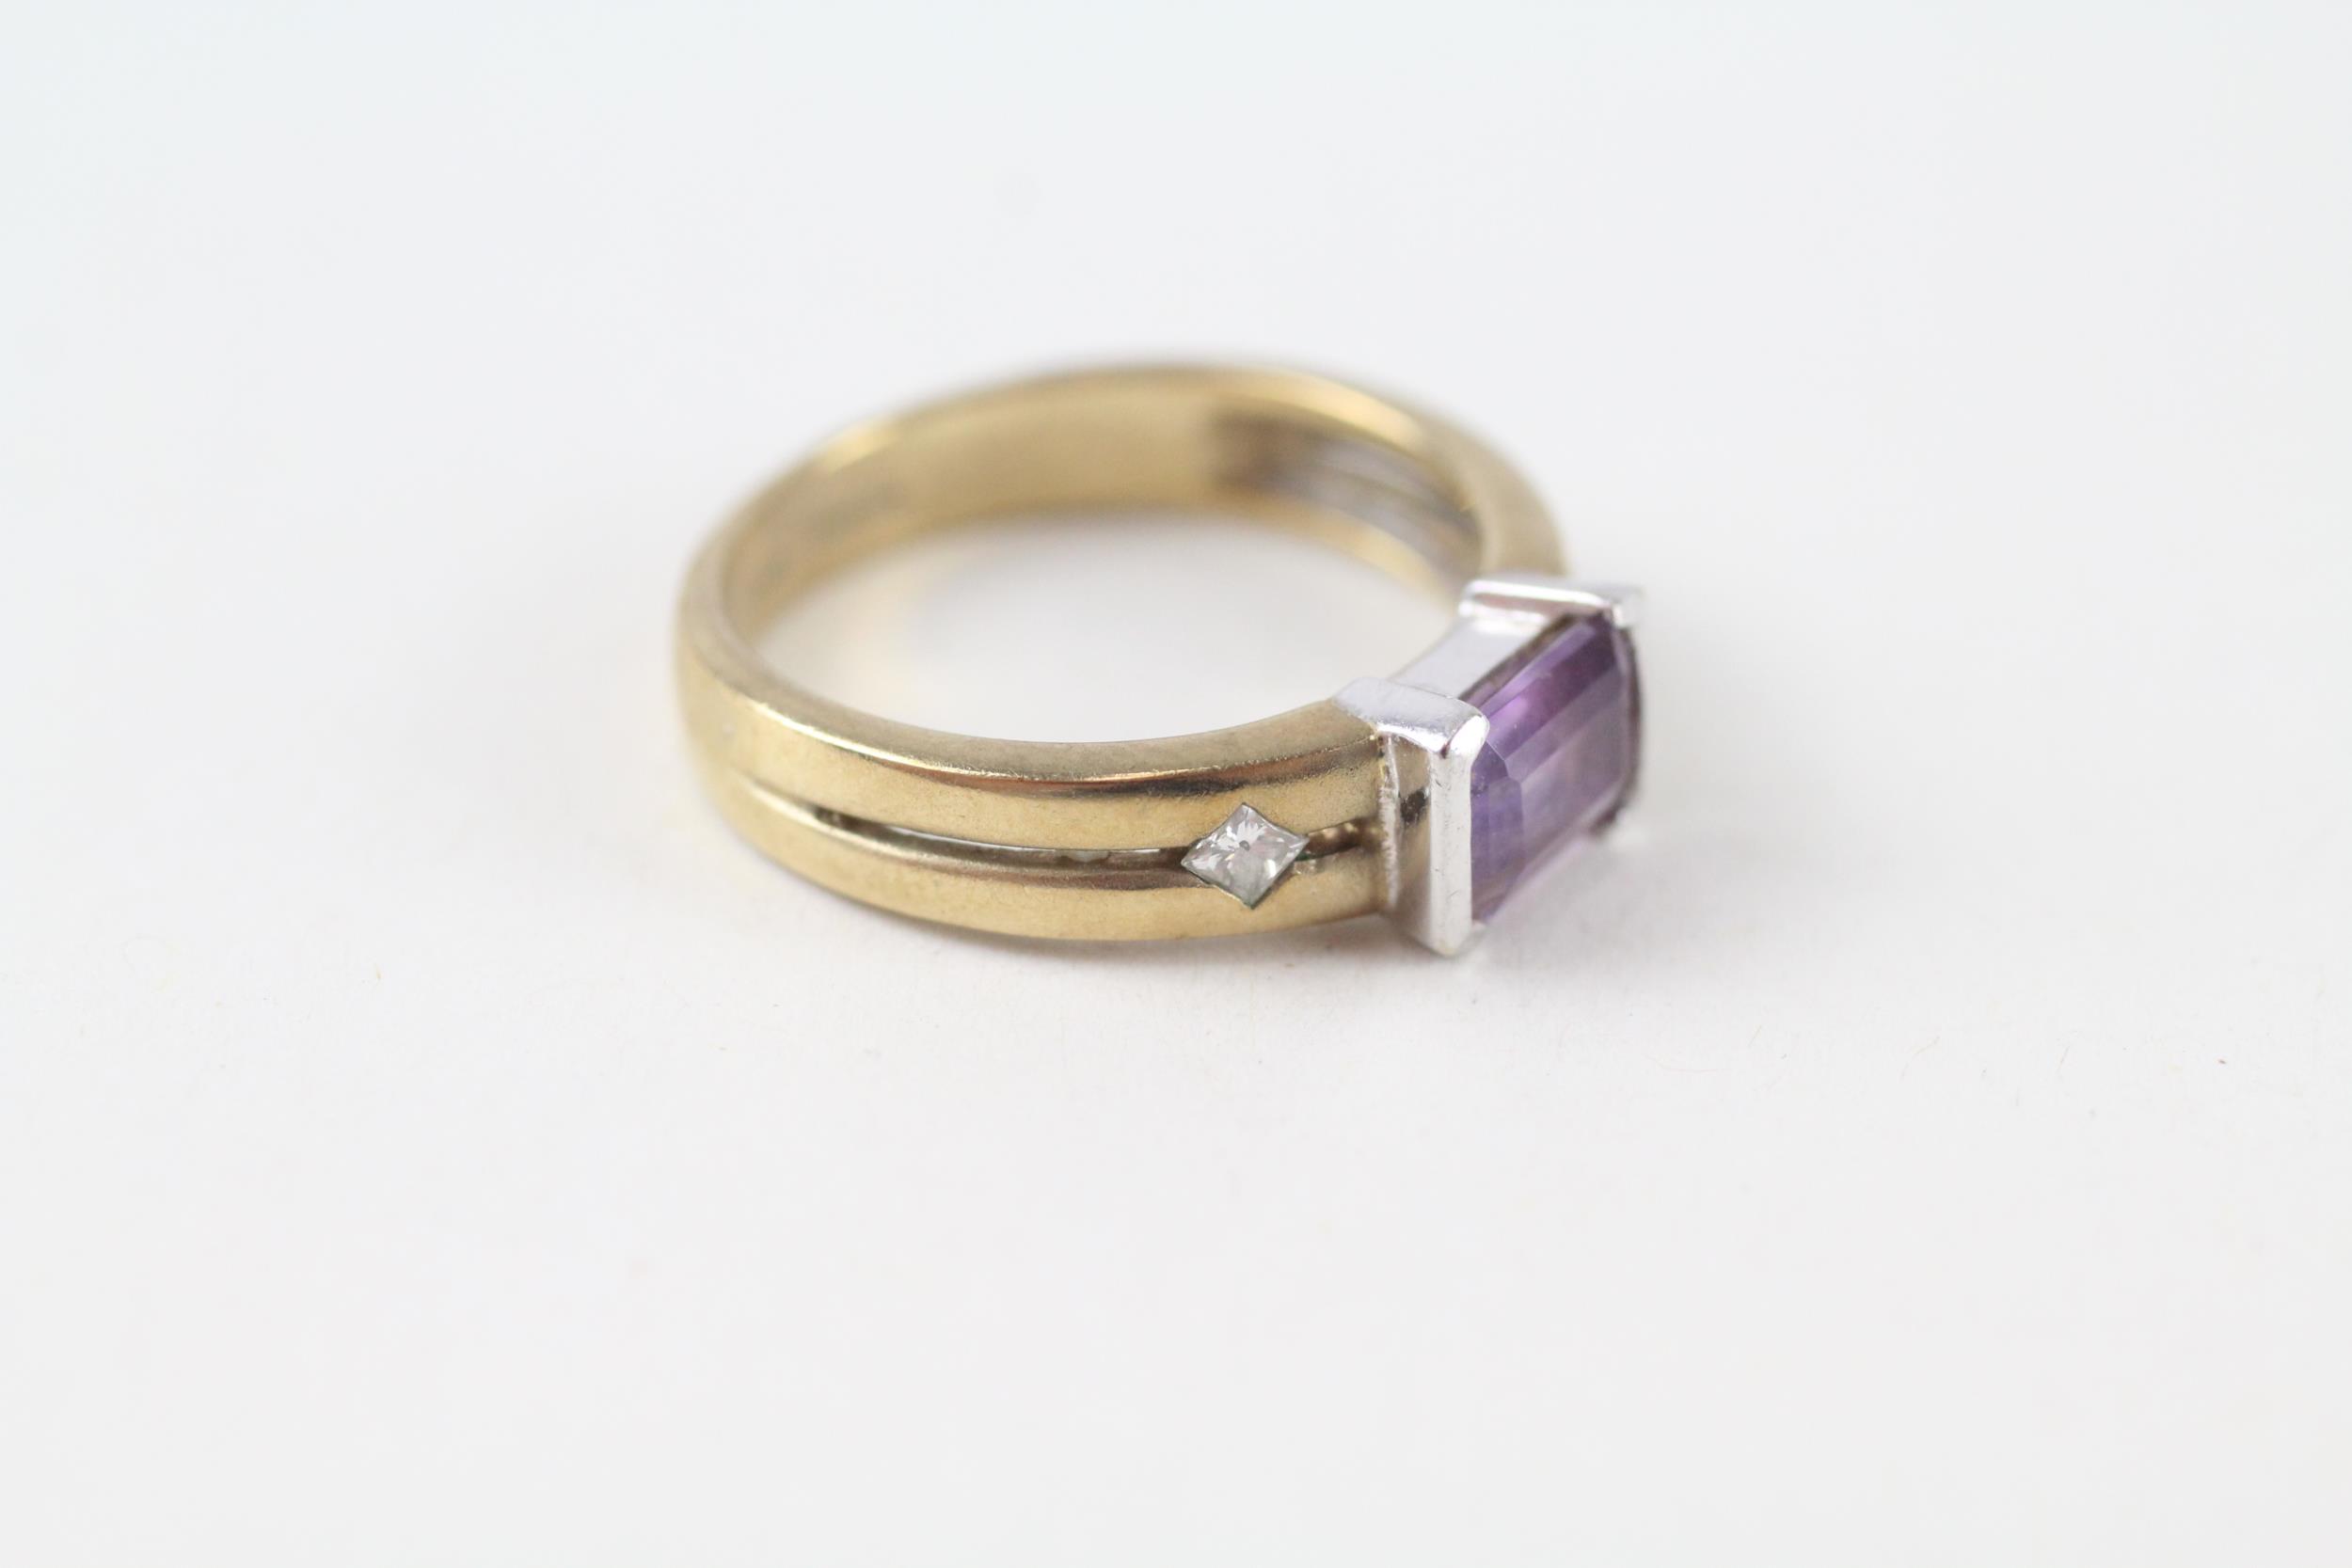 9ct gold emerald cut amethyst single stone ring with diamond sides (3.4g) Size N - Image 2 of 4